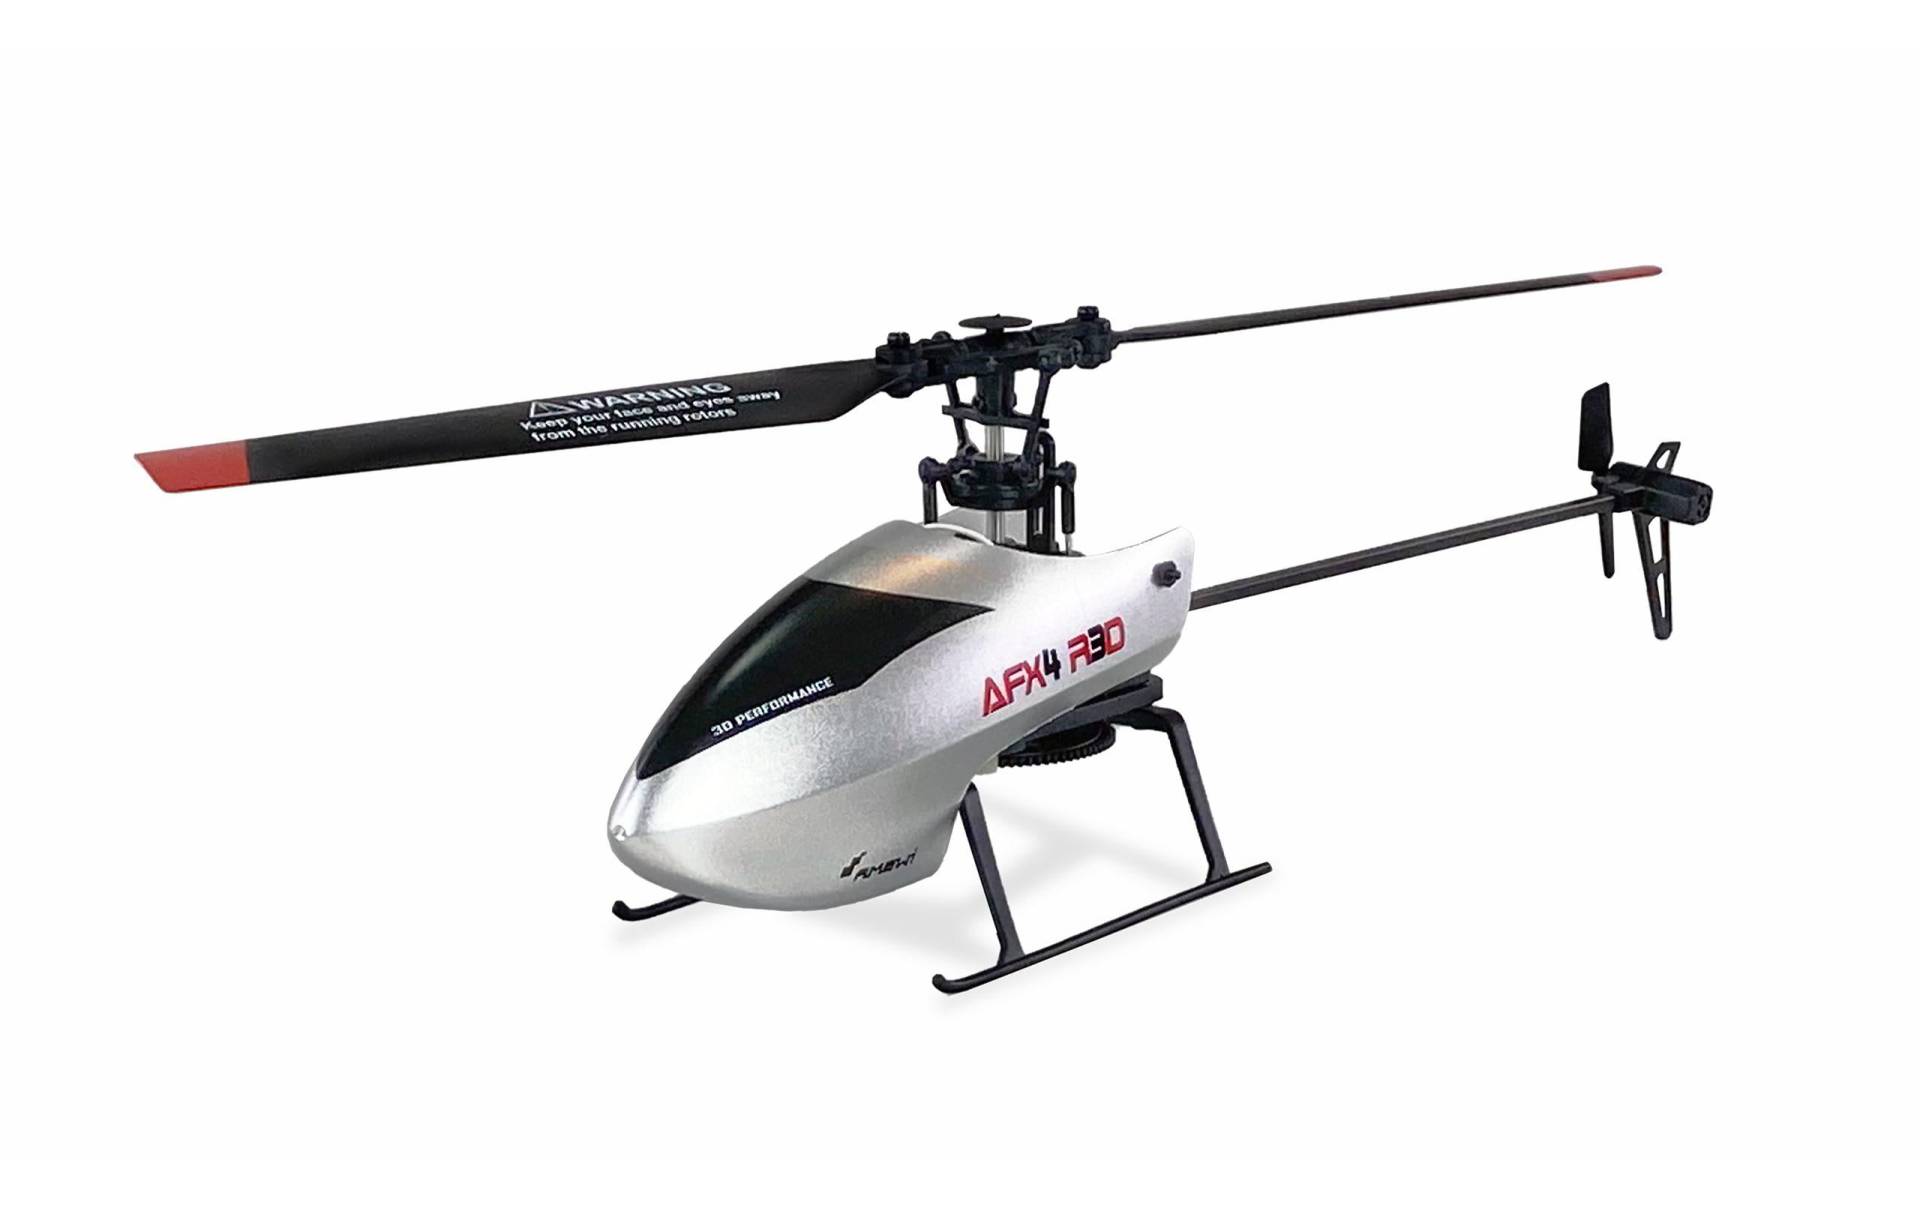 Amewi RC-Helikopter »Helikopter AFX4 R3D, 4-Kanal RTF« von AMEWI